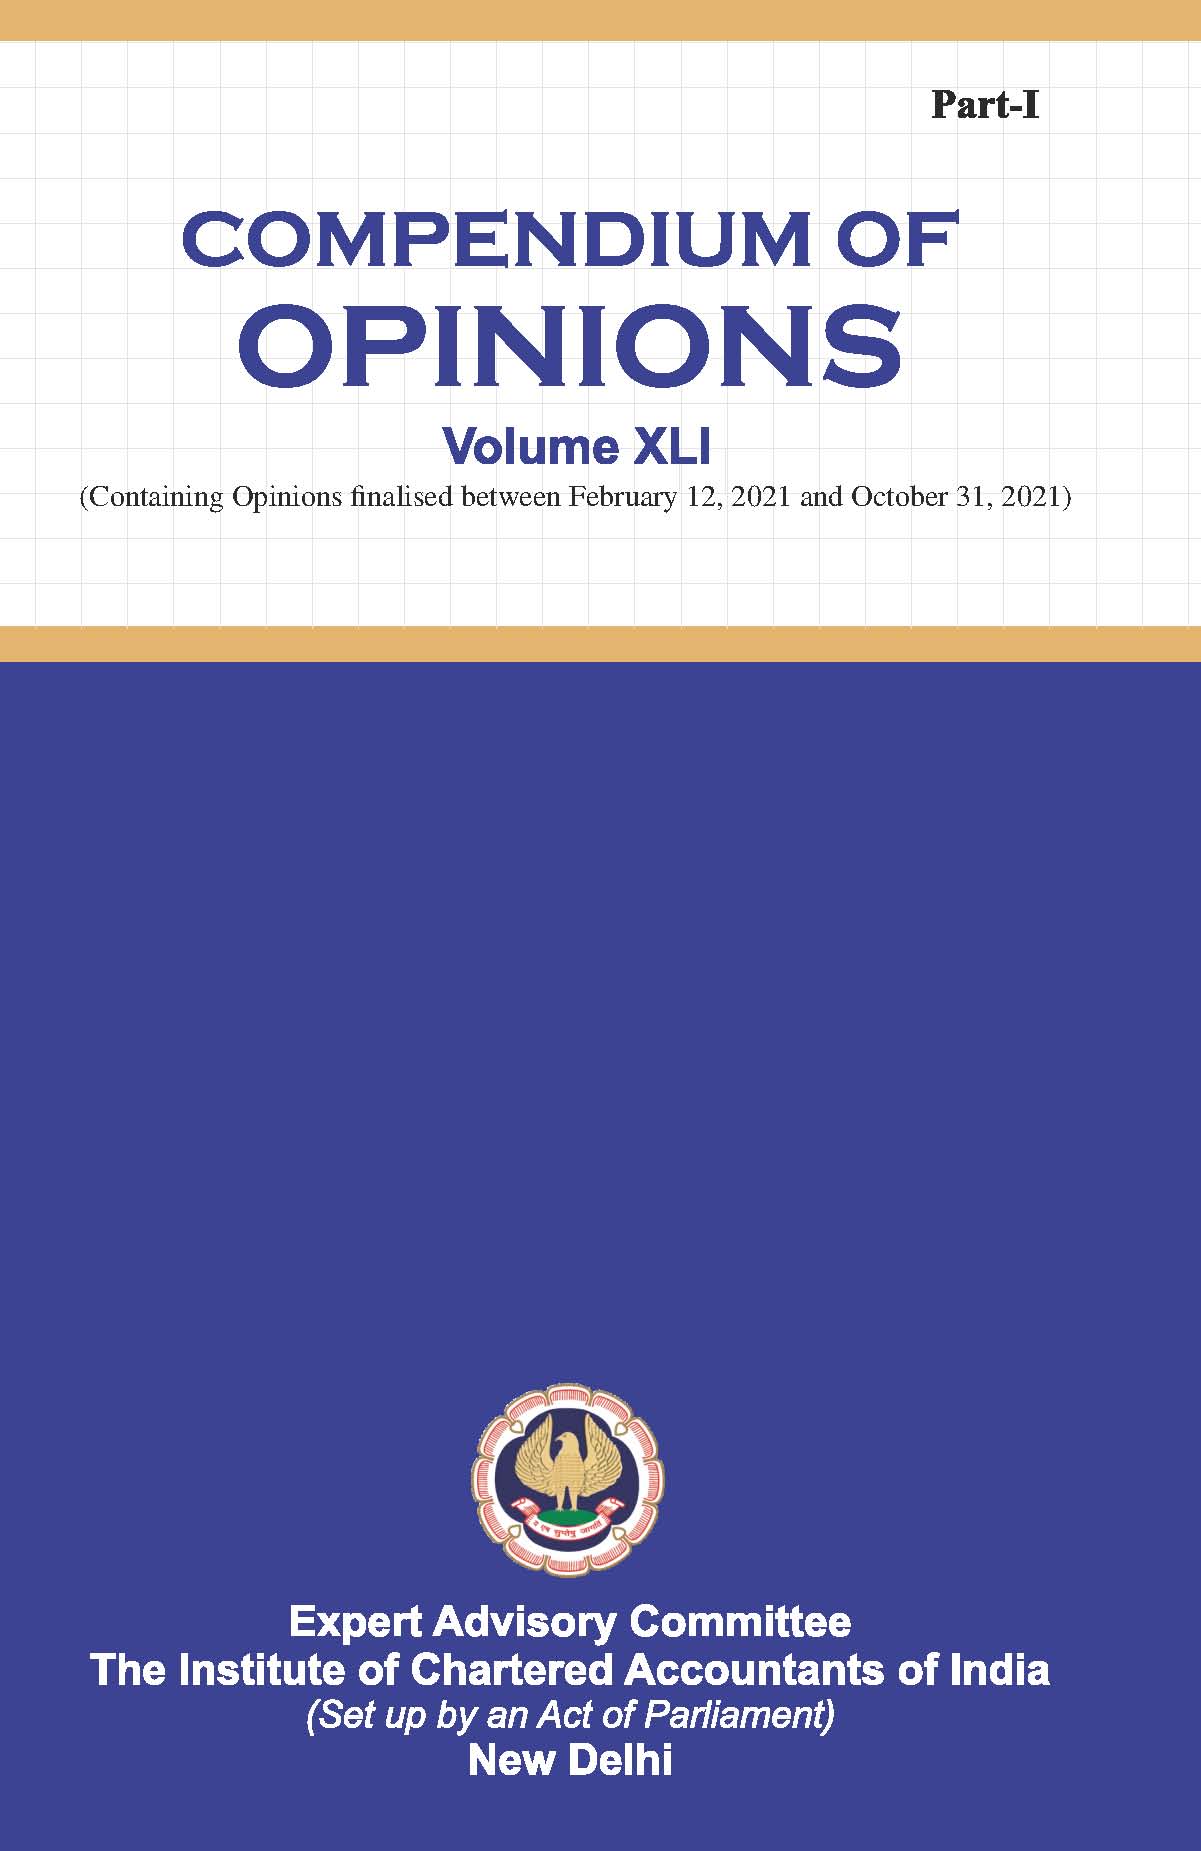 Compendium of Opinions - Vol XLI (Part - I) - July 2022 (Containing Opinions finalised between February 12, 2021 and October 31, 2021)